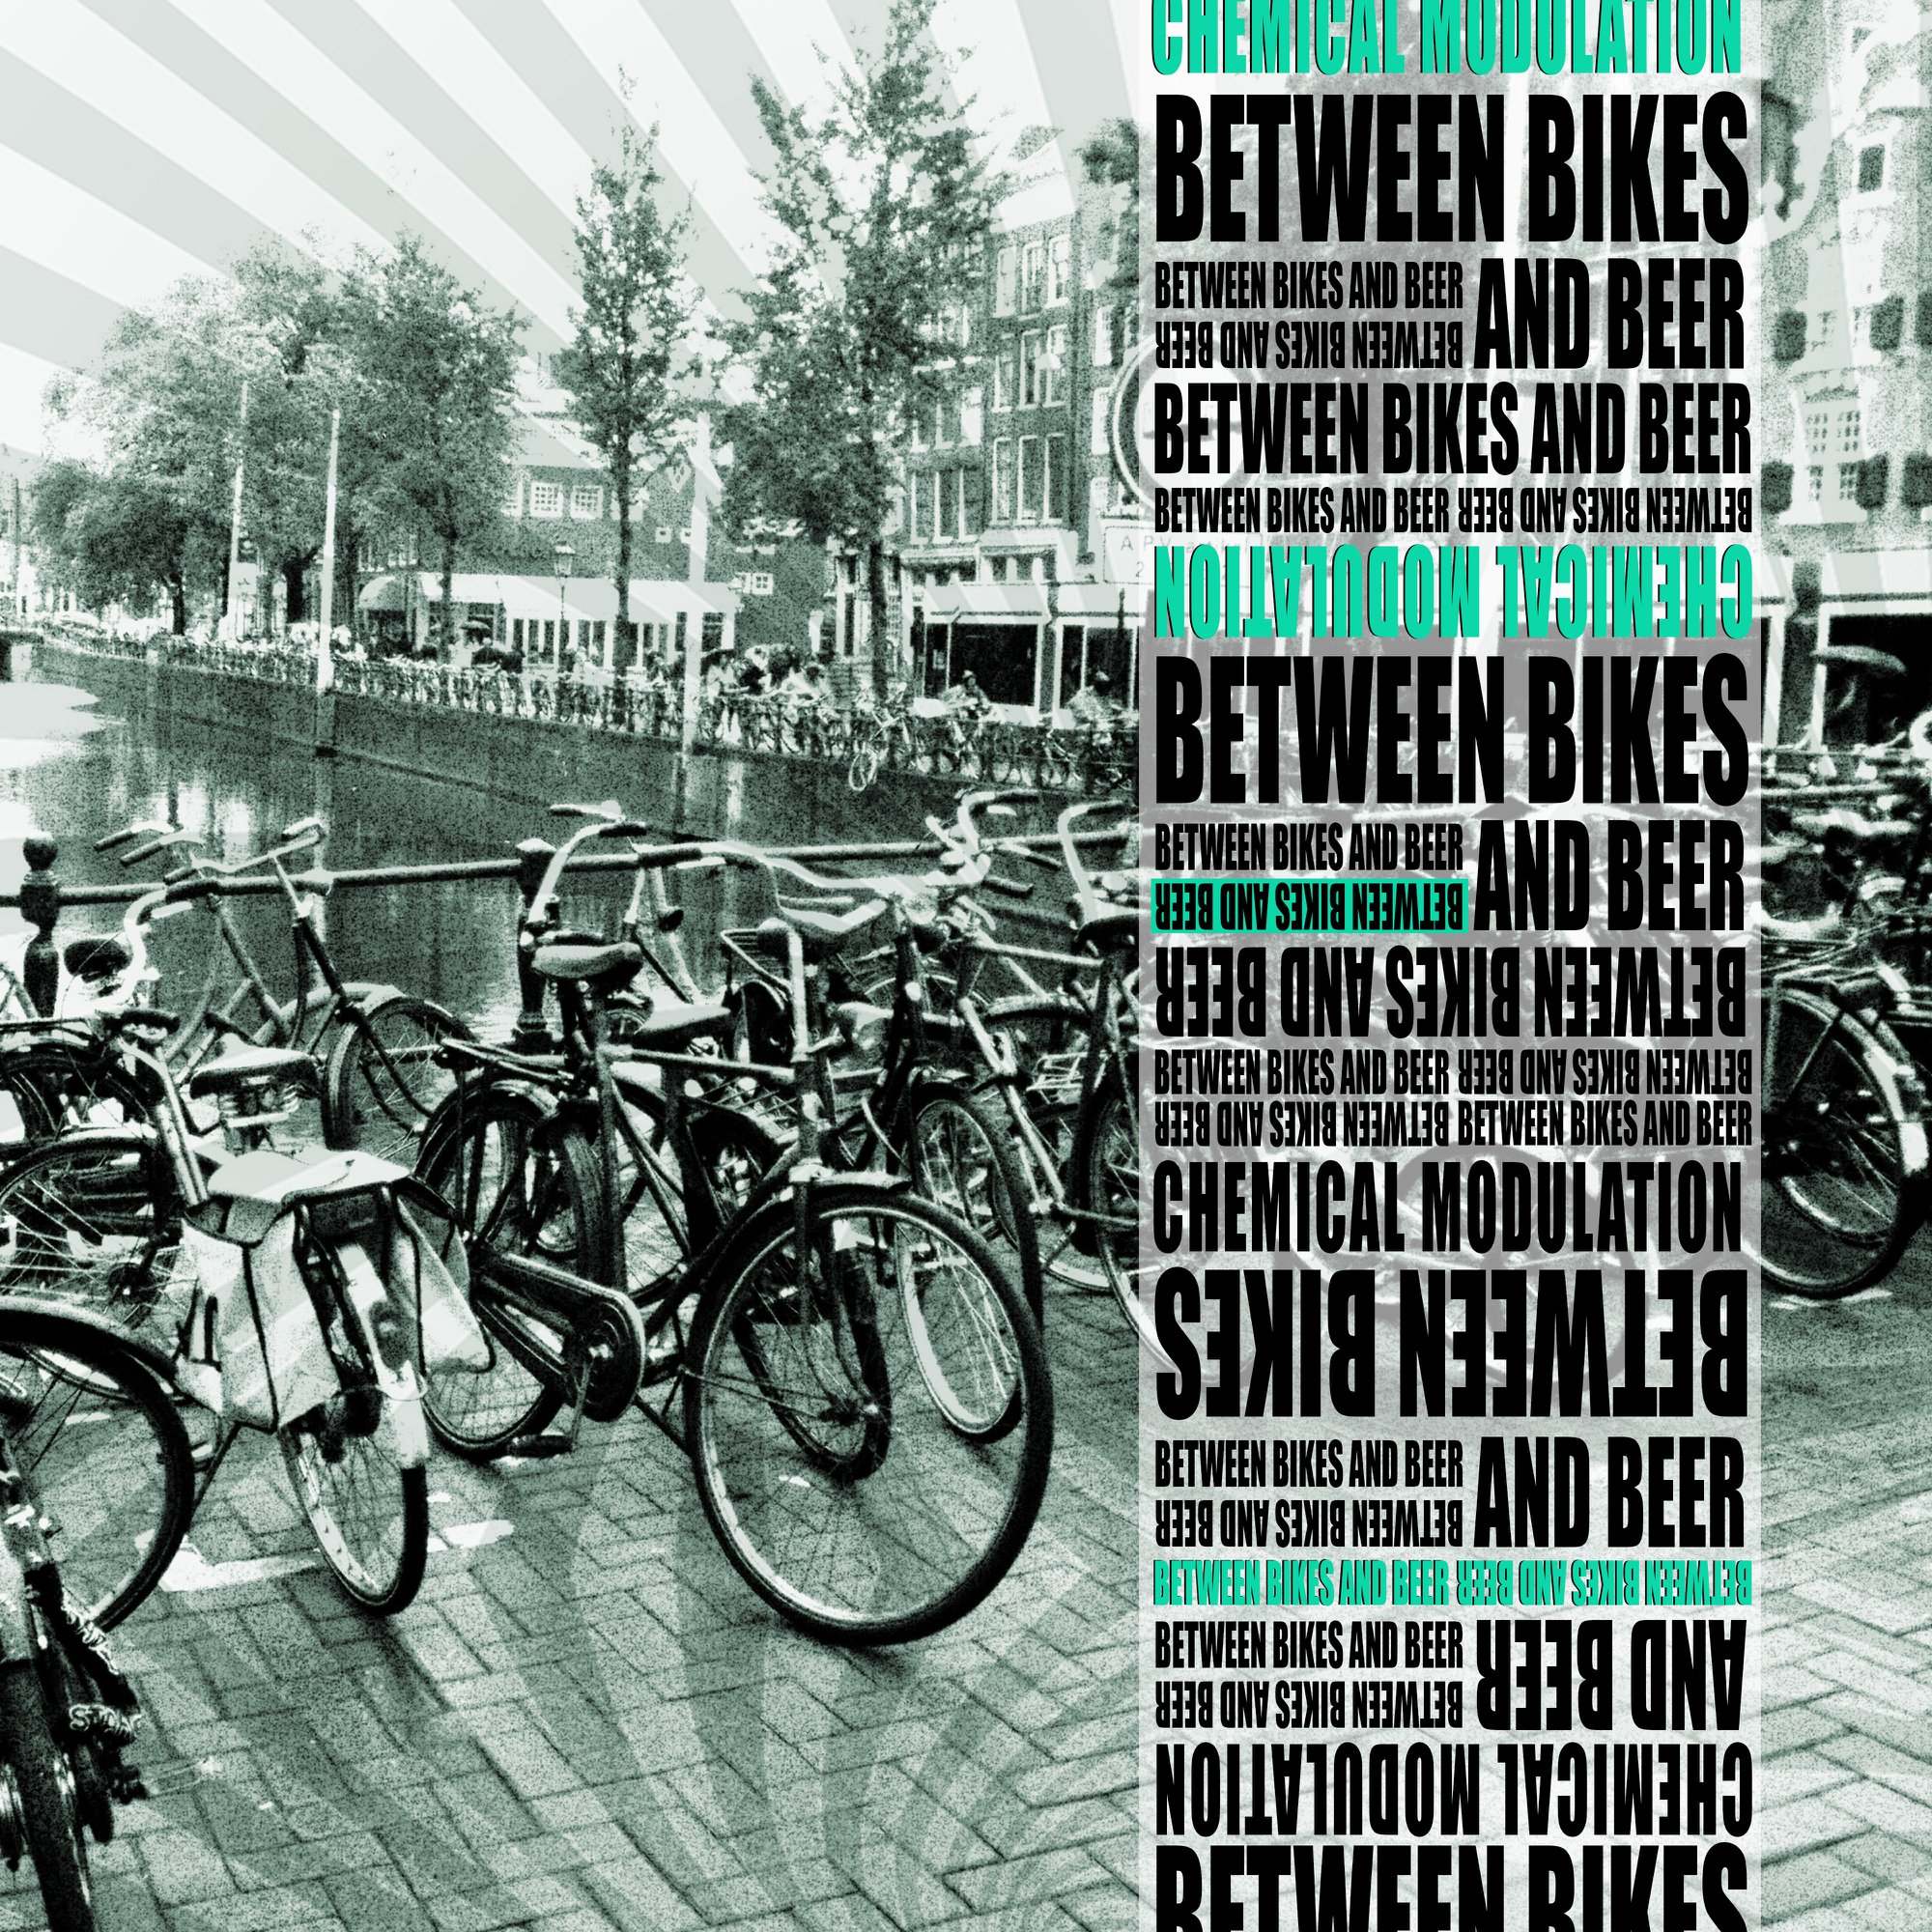 "Between Bikes and Beer" is out